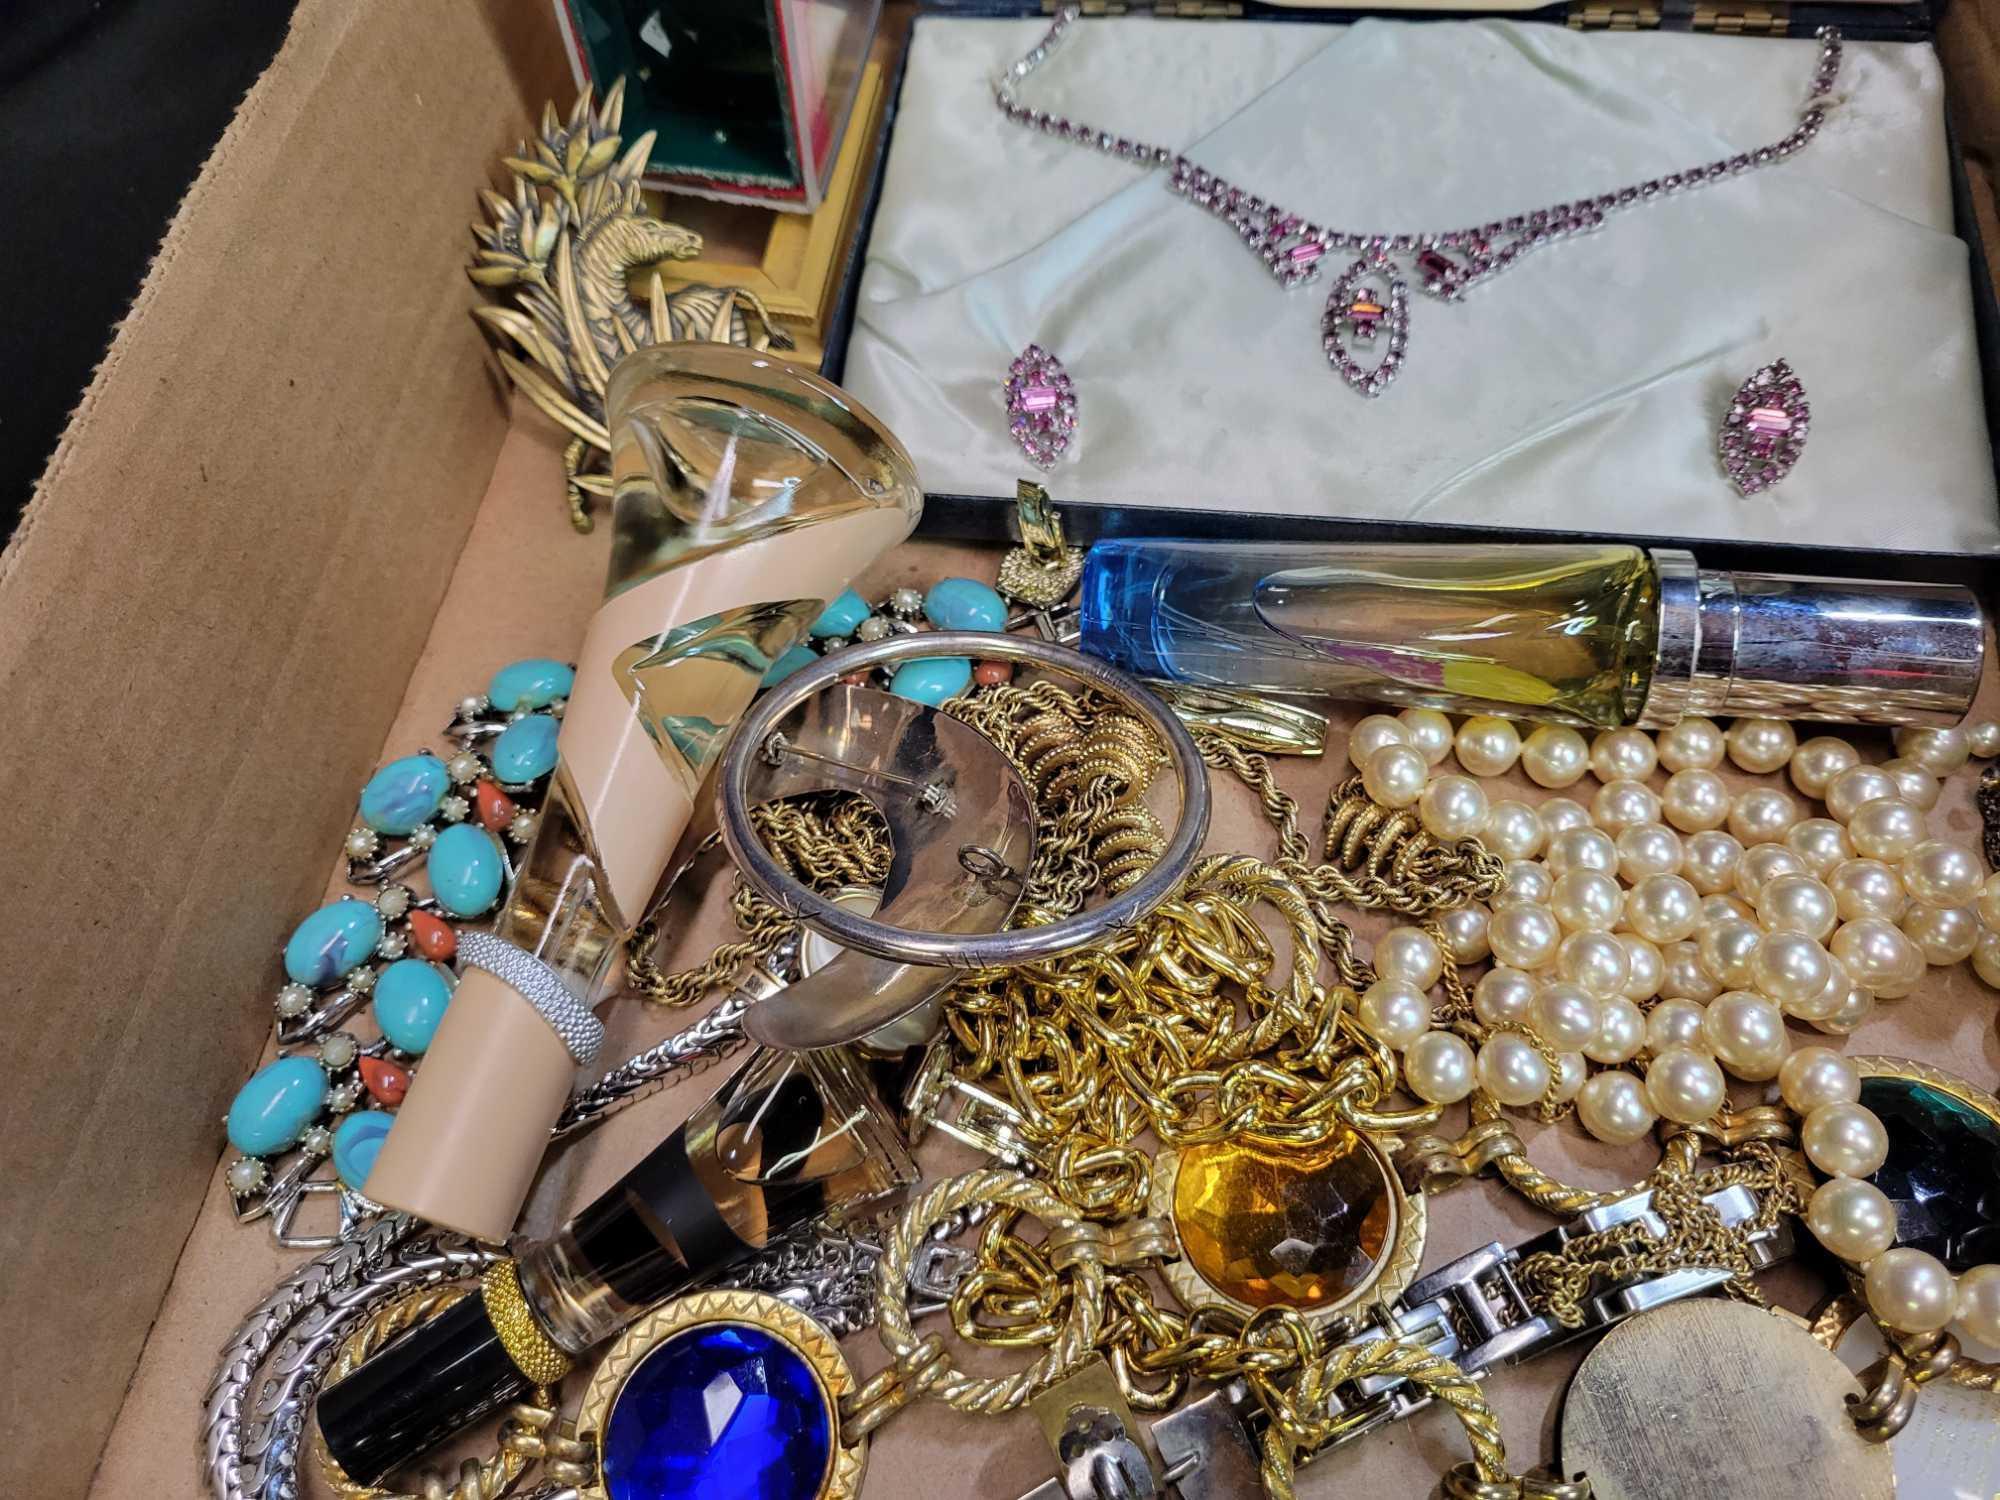 2 boxes of sterling and costume jewelry, earrings, bracelets, necklaces